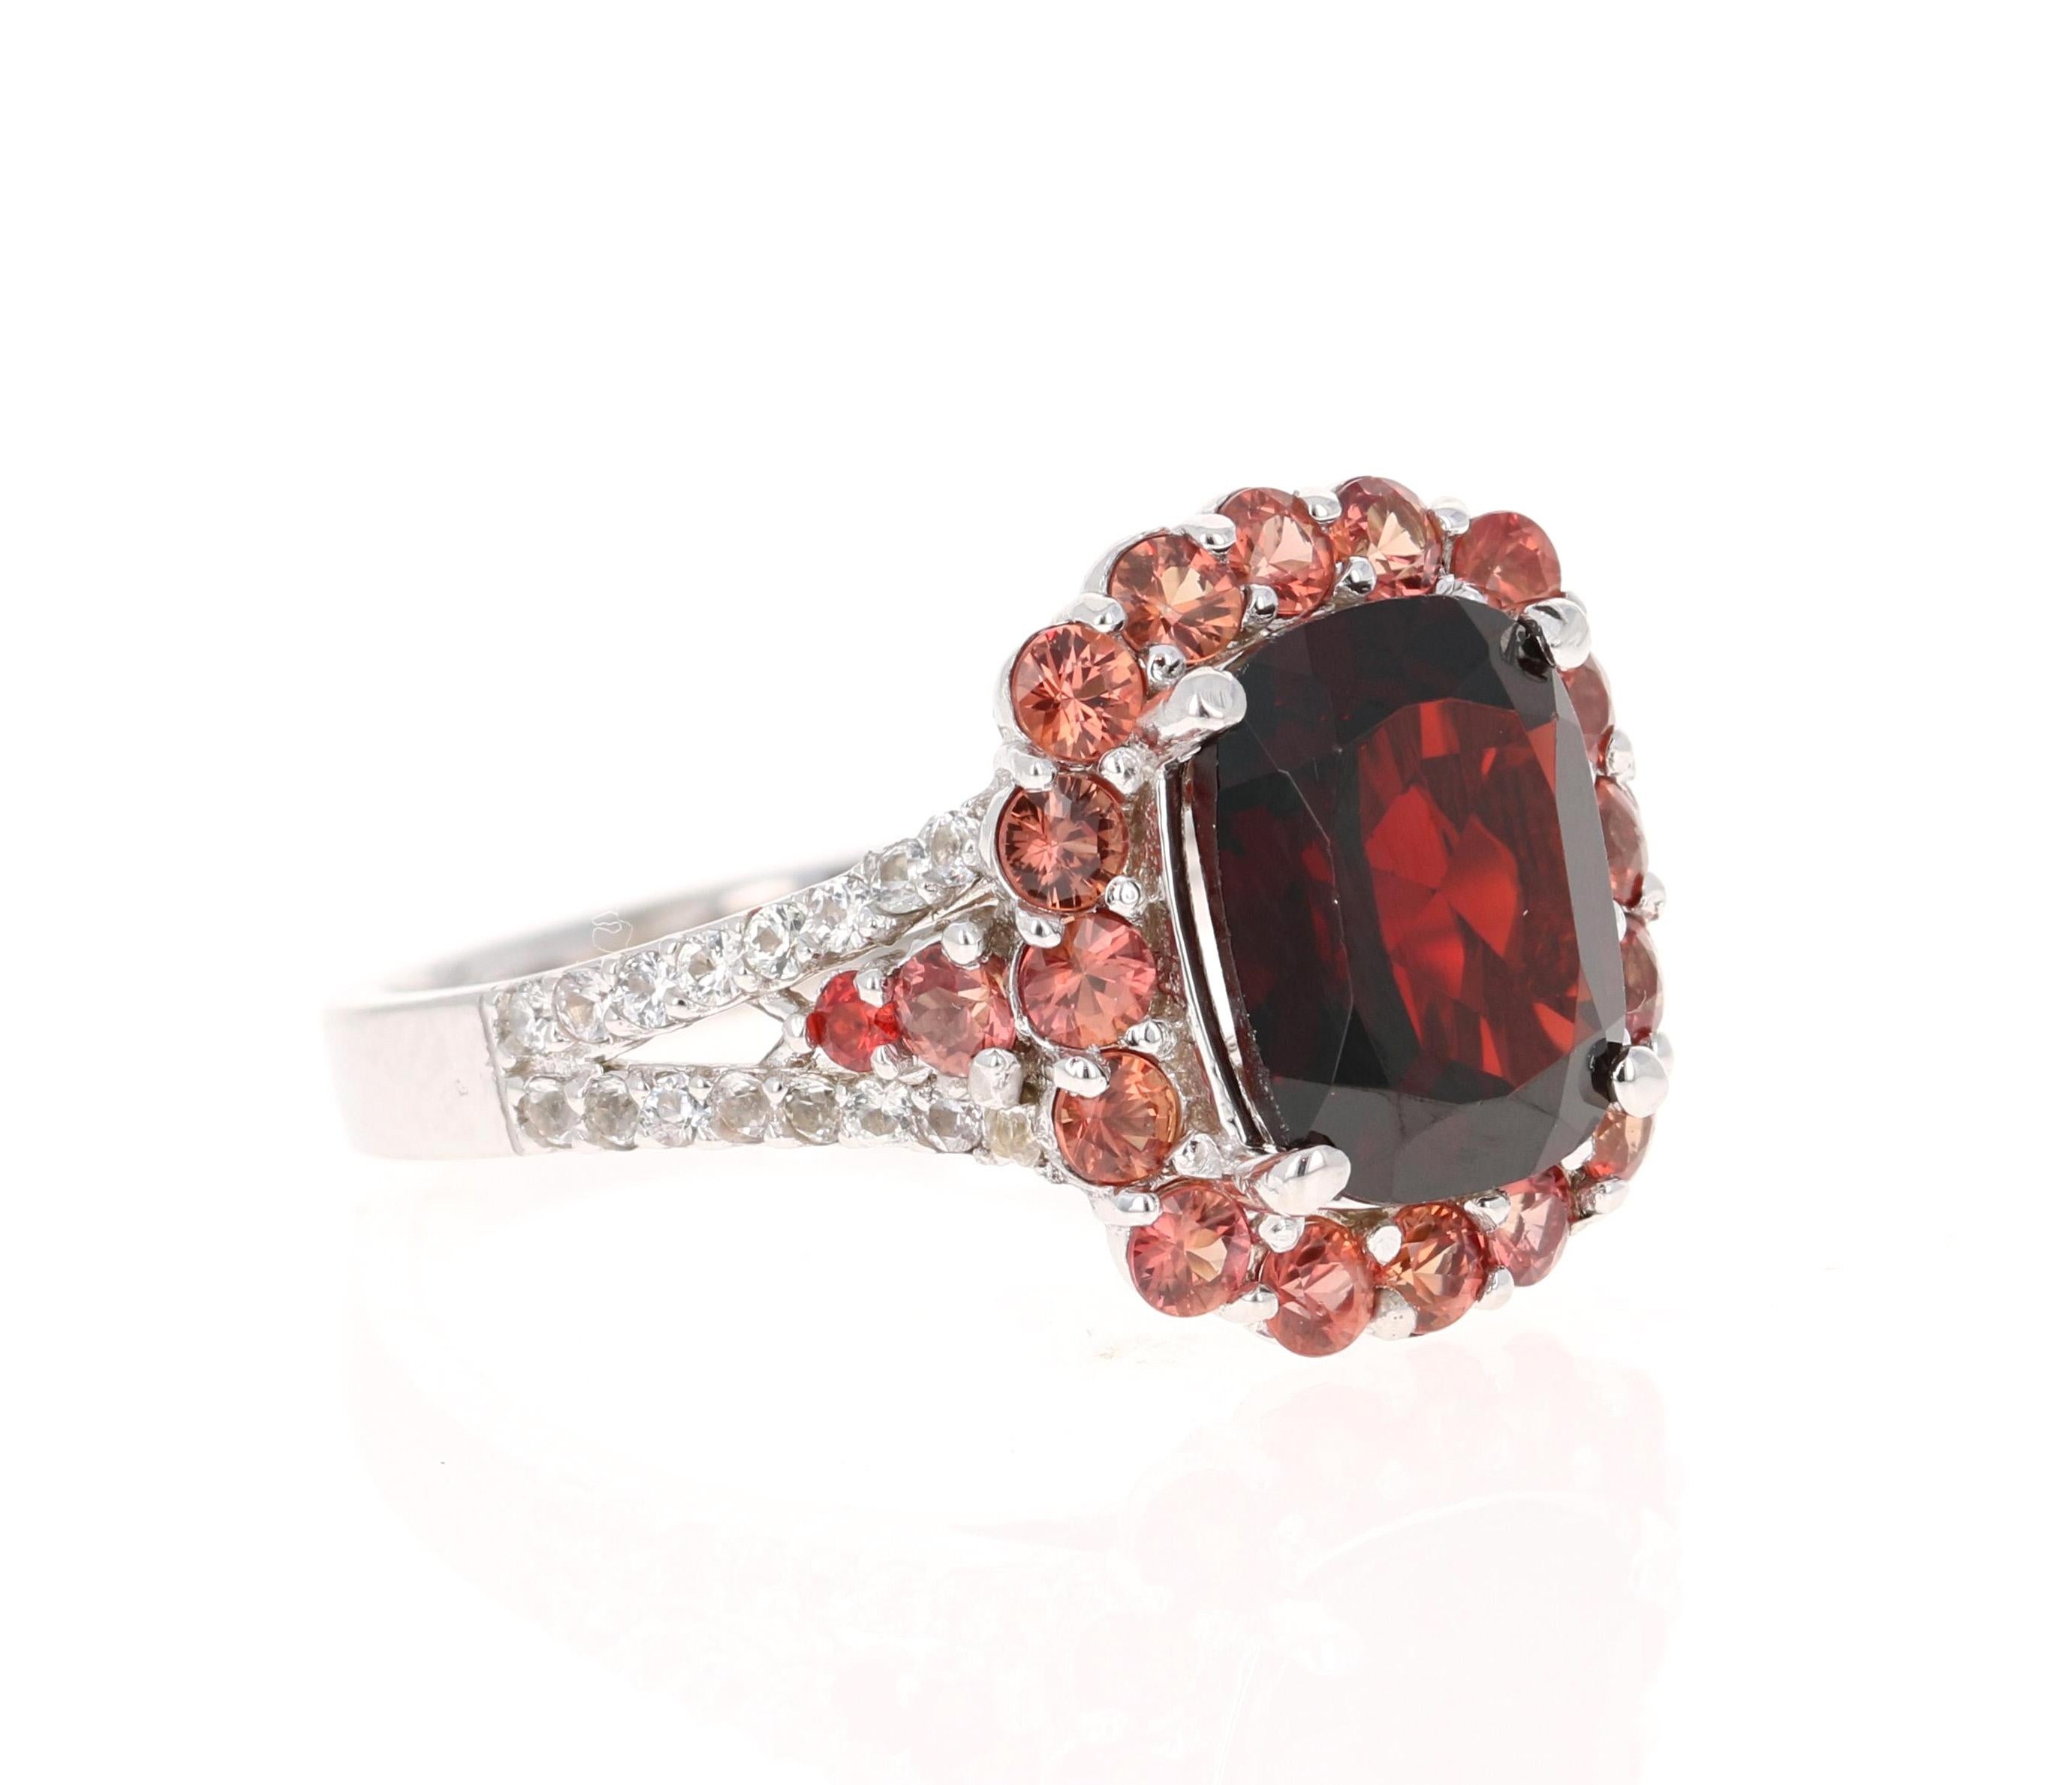 This ring has a Cushion-Oval Cut Garnet weighing 3.42 carats and is surrounded by 19 Round Cut Natural Red Sapphires weighing 1.04 carats. Additionally there are 32 Round Cut White Sapphires that weigh 0.35 carats. The total carat weight of the ring